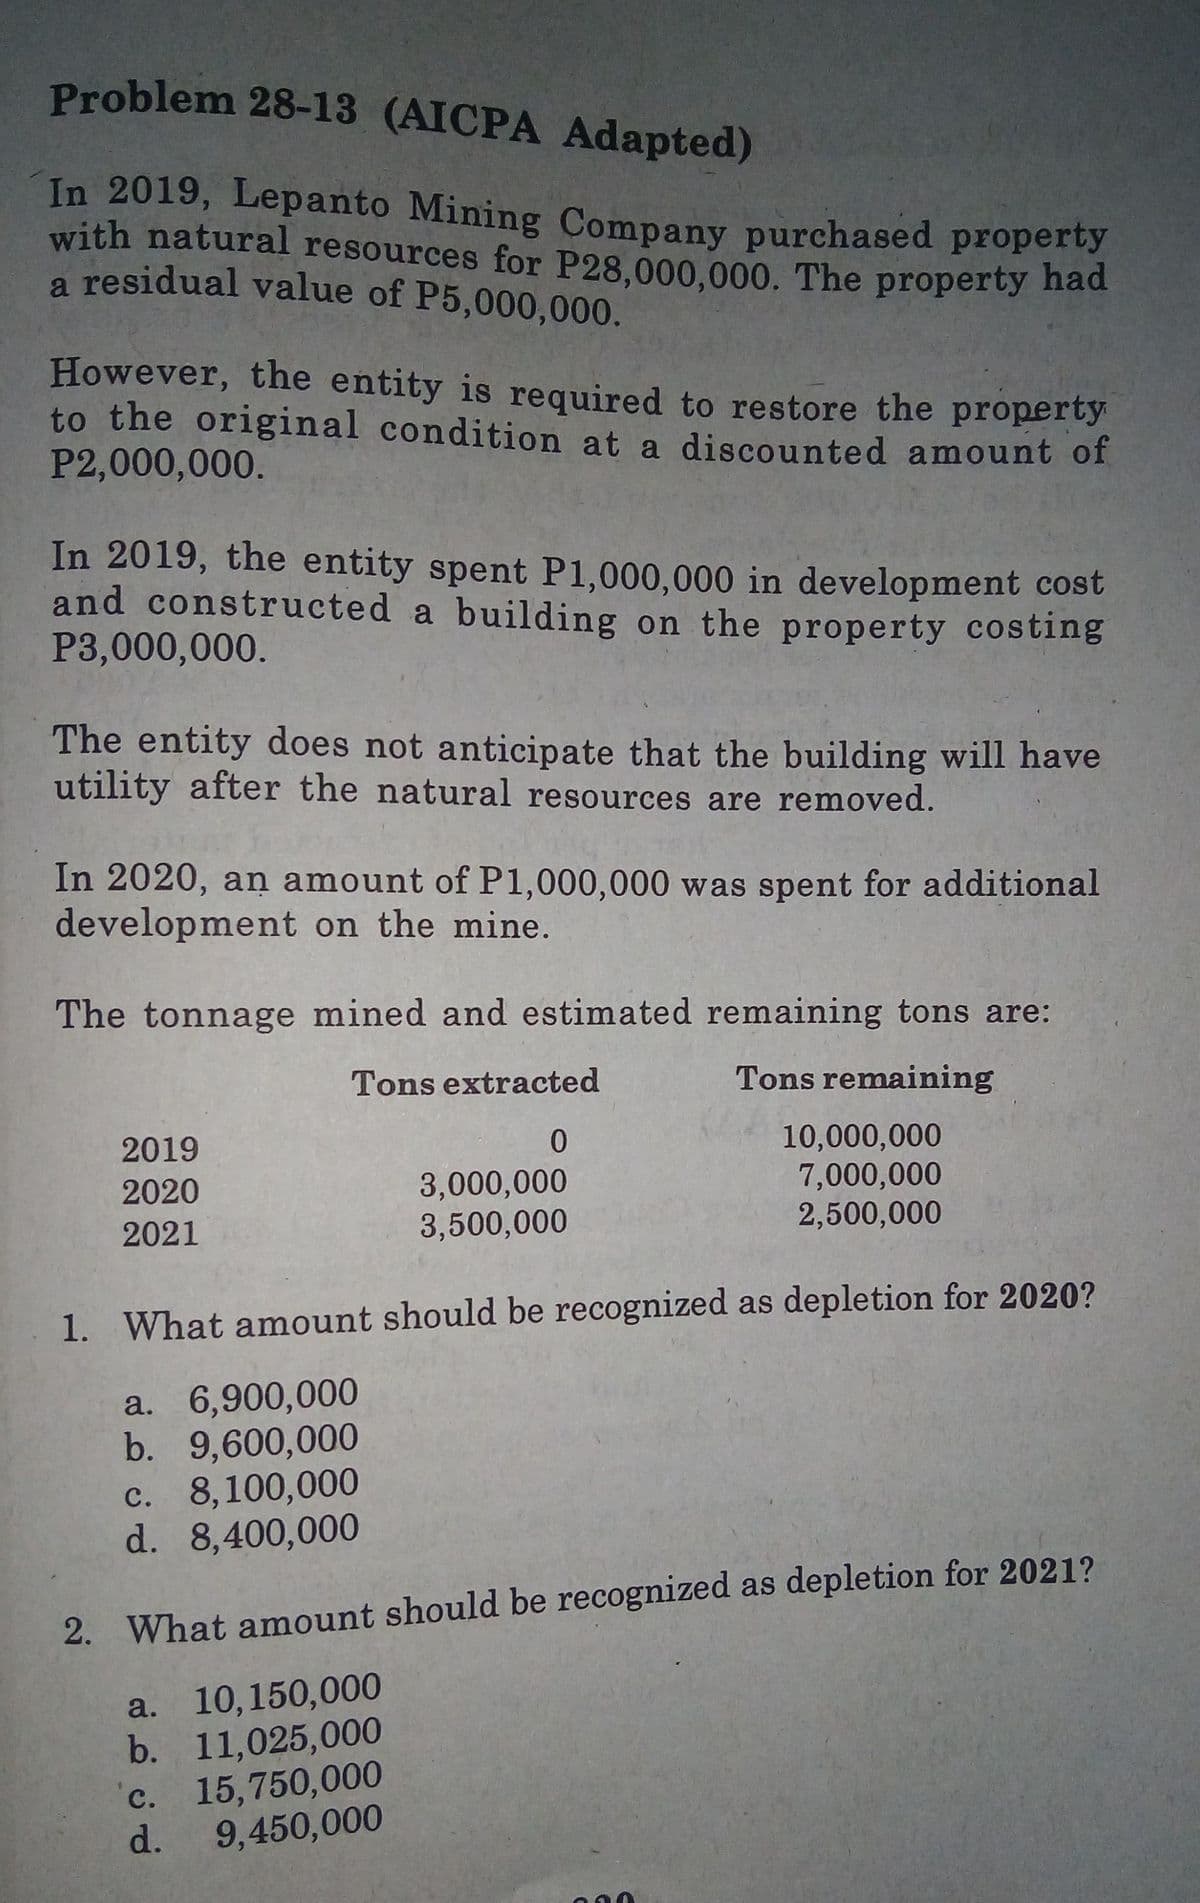 a residual value of P5,000,000.
In 2019, Lepanto Mining Company purchased property
Problem 28-13 (AICPA Adapted)
with natural resources for P28,000,000. The property had
However, the entity is required to restore the property
to the original condition at a discounted amount of
P2,000,000.
In 2019, the entity spent P1,000,000 in development cost
and constructed a building on the property costing
P3,000,000.
The entity does not anticipate that the building will have
utility after the natural resources are removed.
In 2020, an amount of P1,000,000 was spent for additional
development on the mine.
The tonnage mined and estimated remaining tons are:
Tons extracted
Tons remaining
10,000,000
7,000,000
2,500,000
2019
3,000,000
3,500,000
2020
2021
1. What amount should be recognized as depletion for 2020?
a. 6,900,000
b. 9,600,000
c. 8,100,000
d. 8,400,000
2. What amount should be recognized as depletion for 2021?
a. 10,150,000
b. 11,025,000
c. 15,750,000
d.
9,450,000
